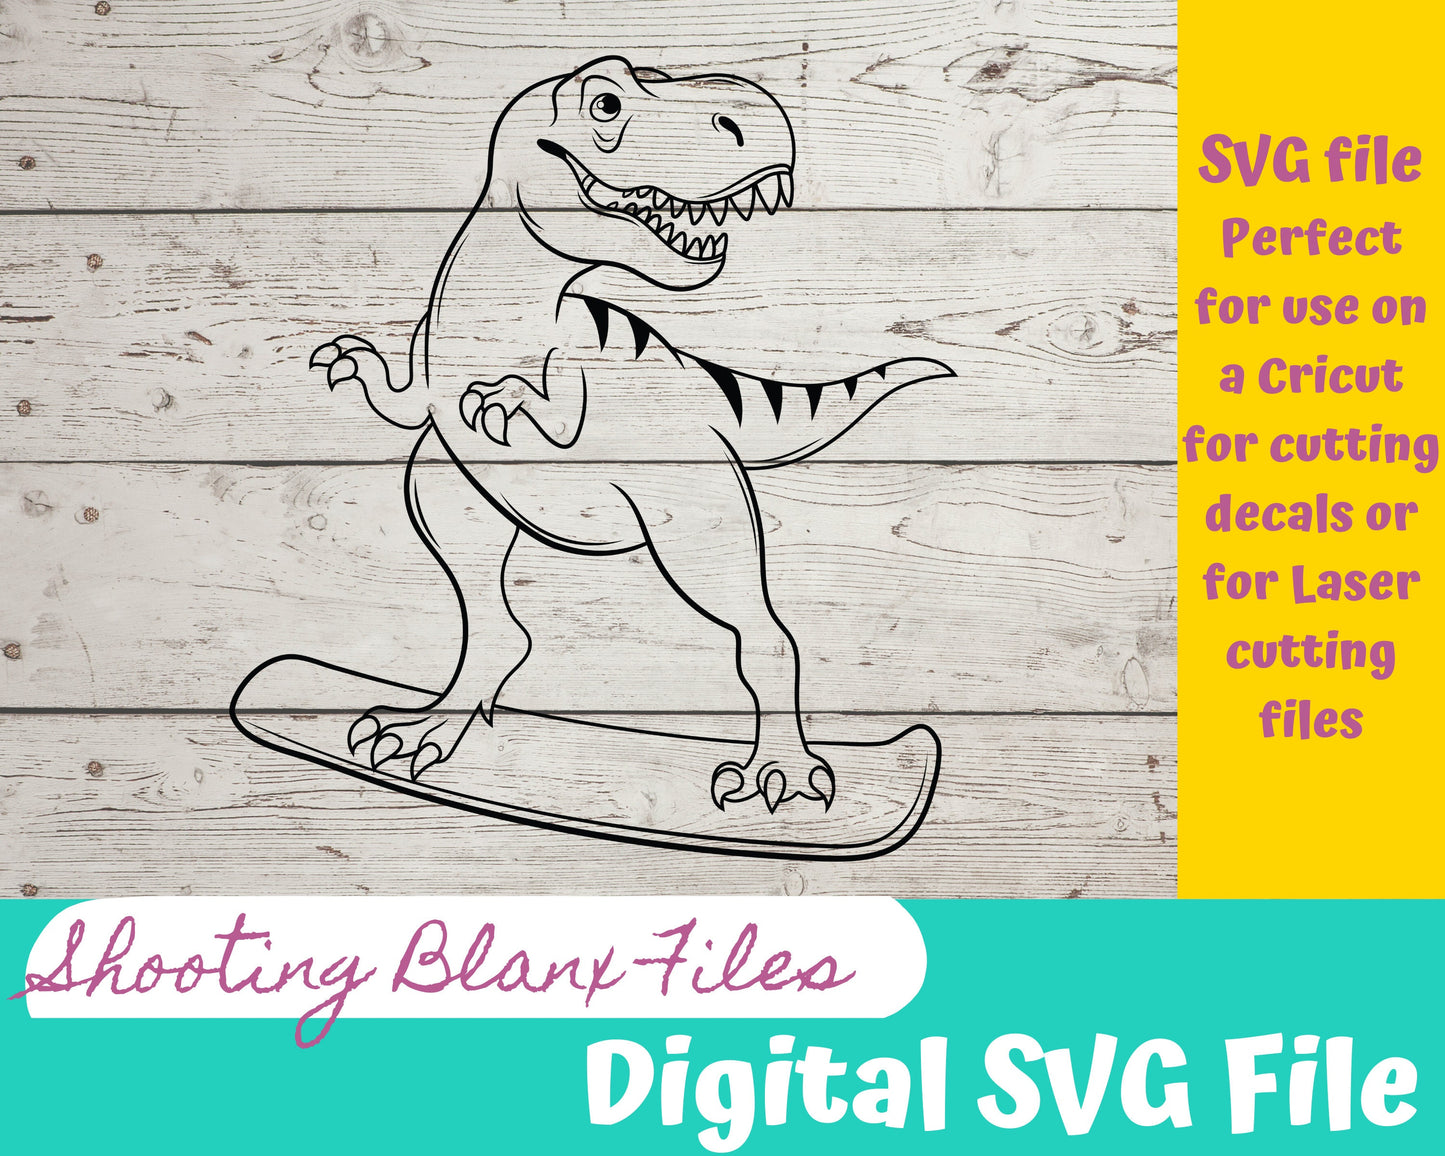 T-rex Dino bundle SVG files perfect for Cricut, Cameo, or Silhouette also for laser engraving Glowforge, Jurassic, Ice Age